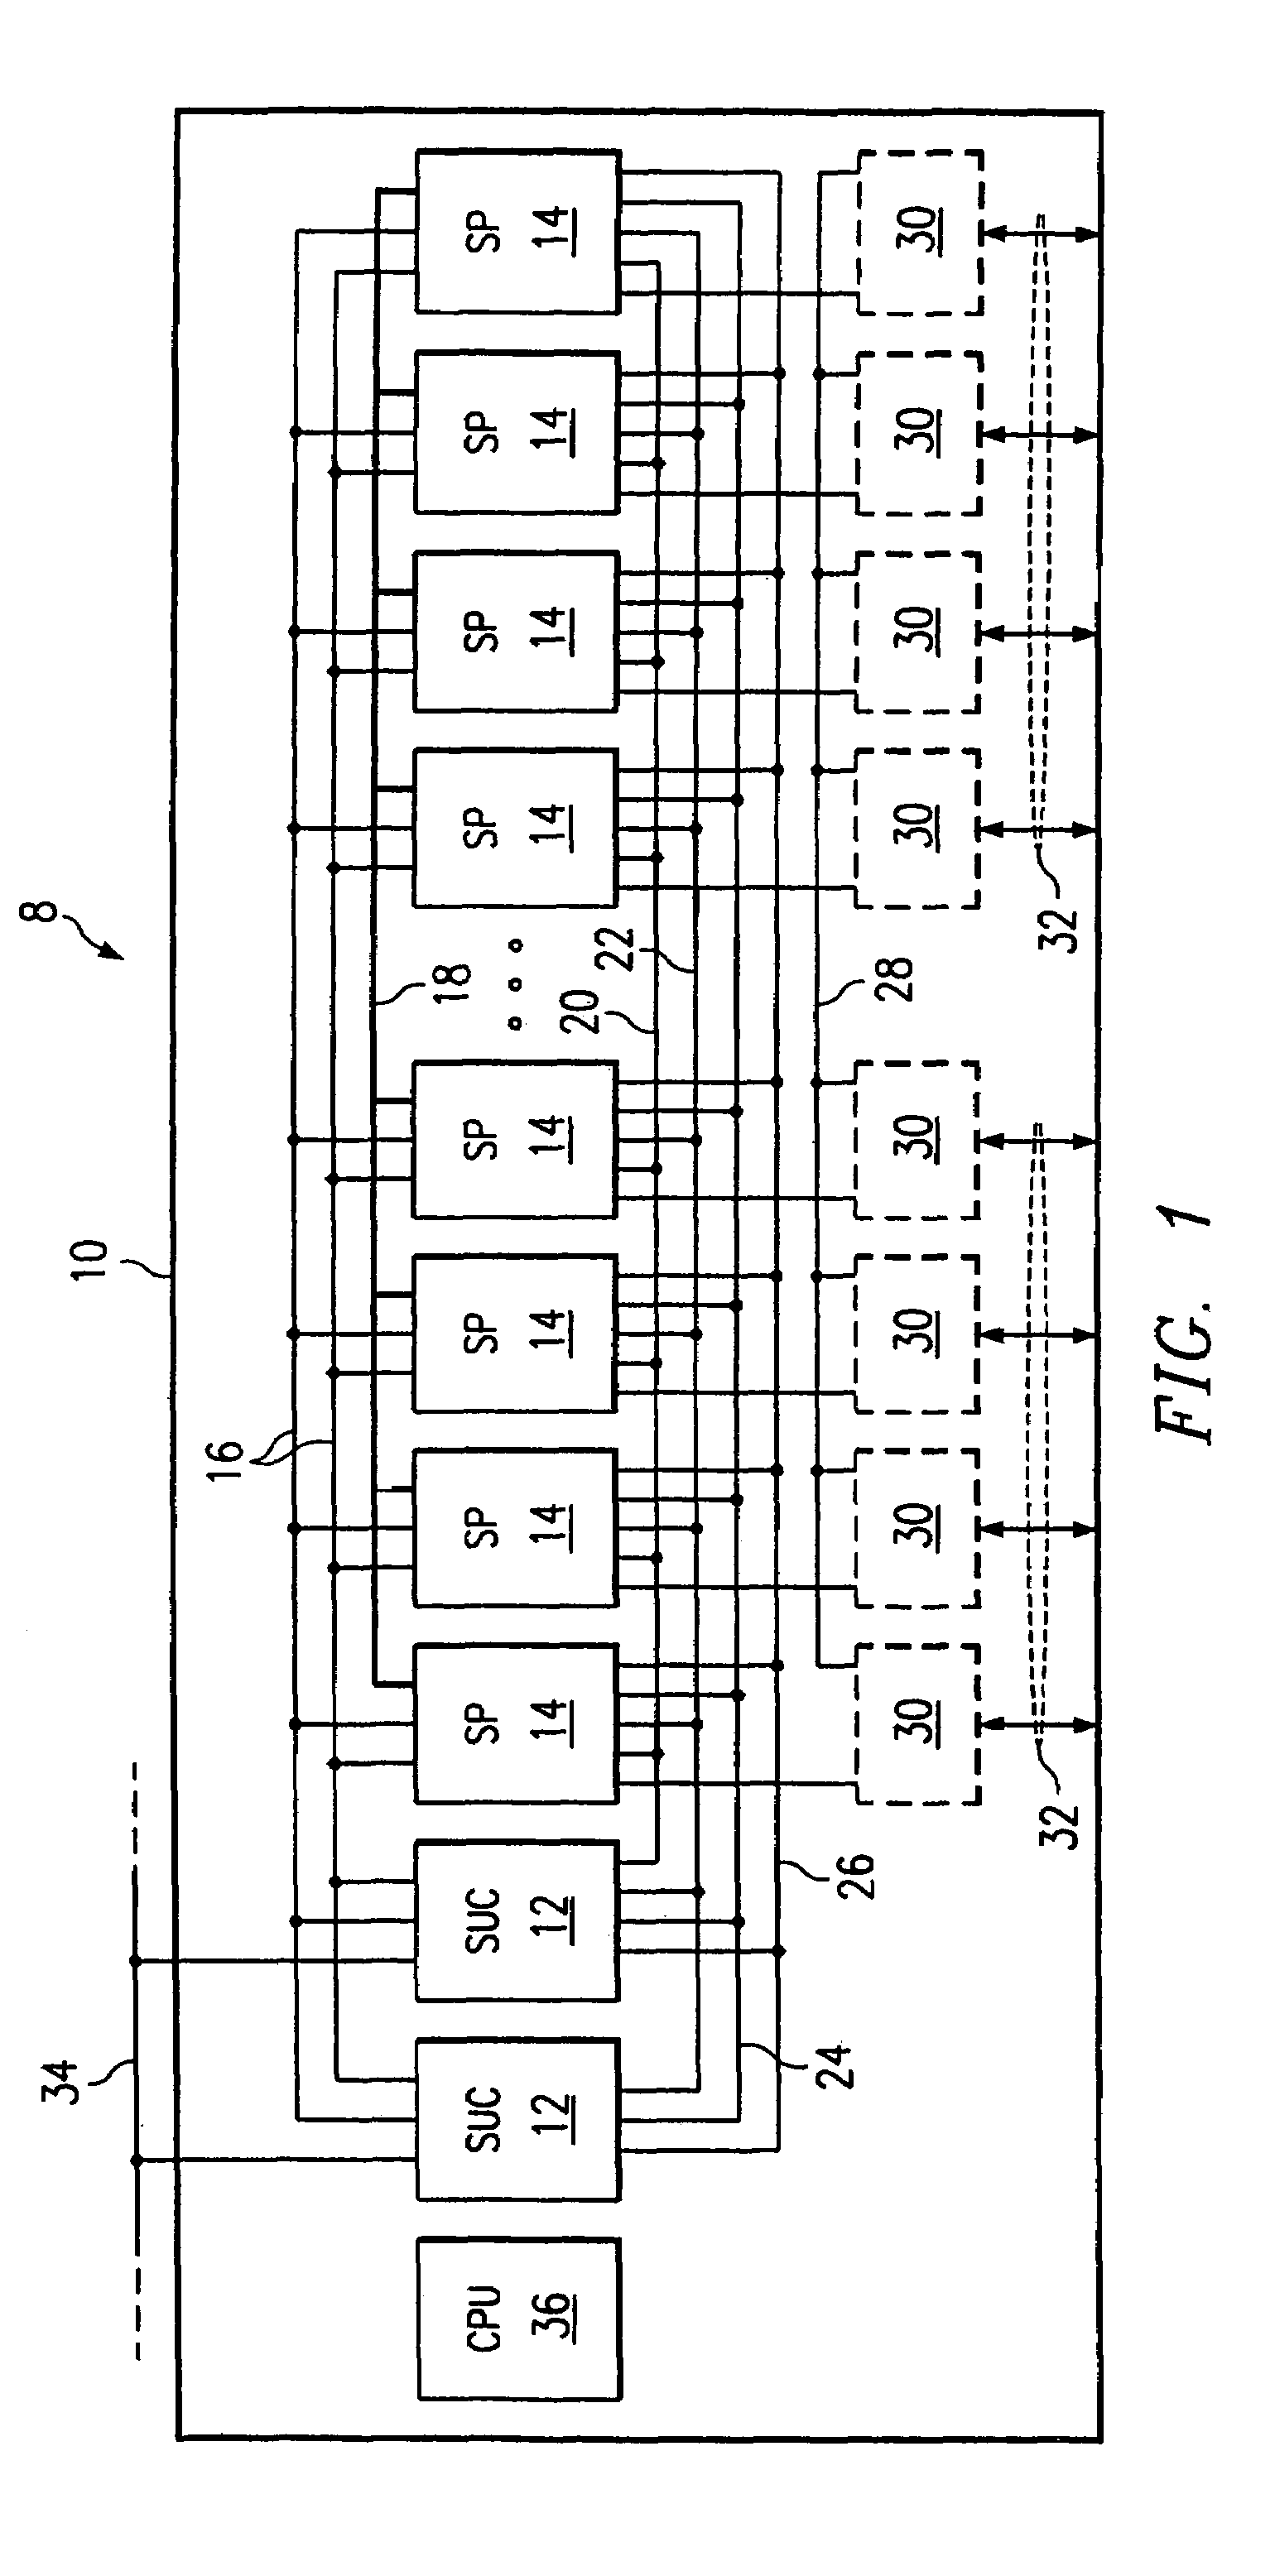 TDM switching system and ASIC device